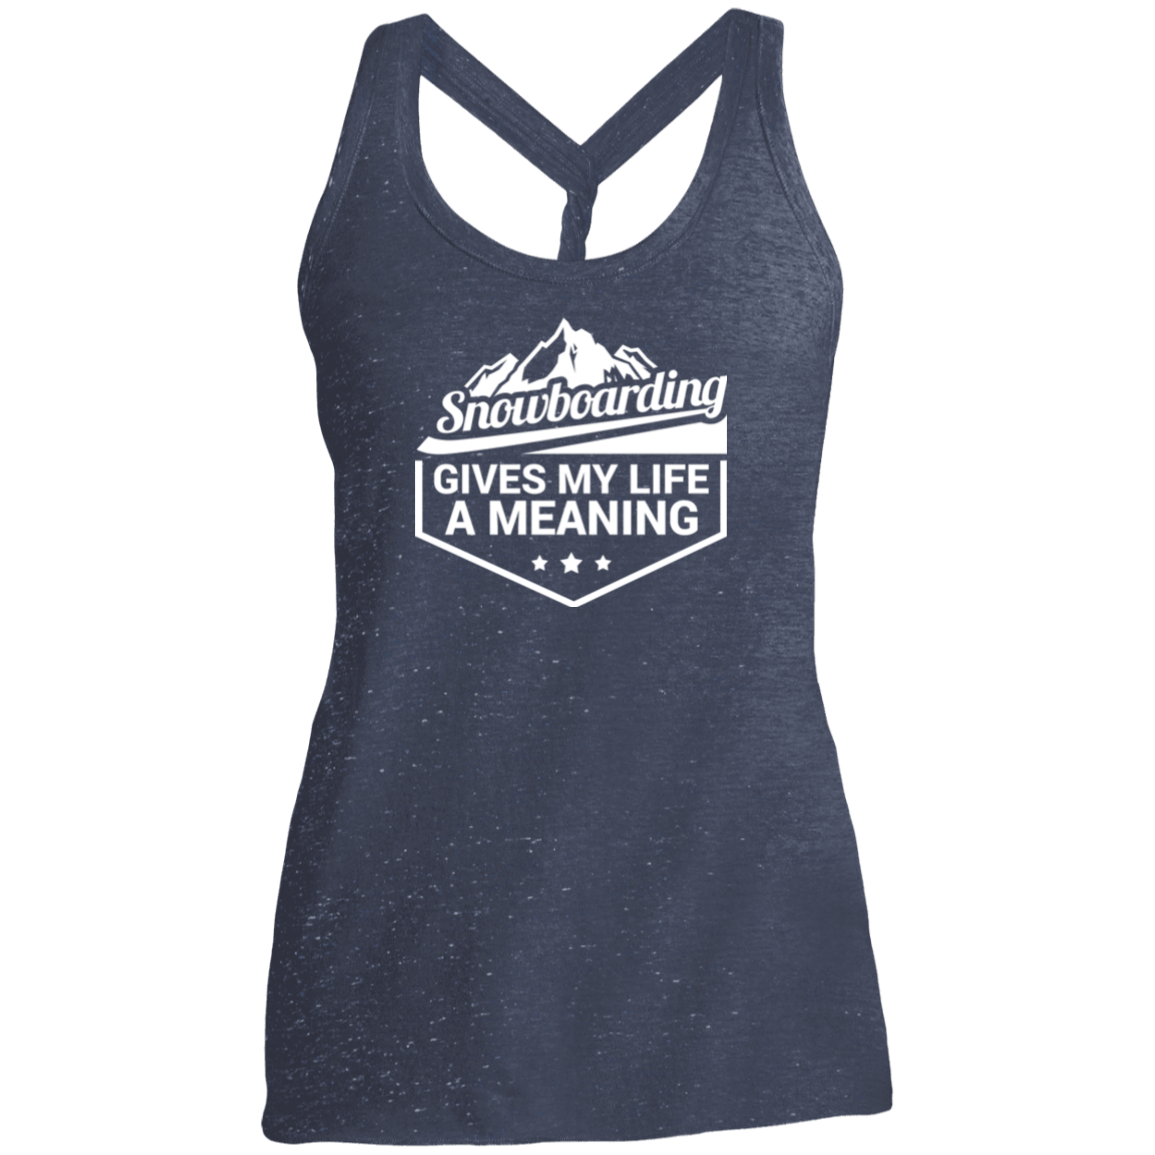 Snowboarding Gives My Life A Meaning Ladies Tees and Tank Tops - Powderaddicts